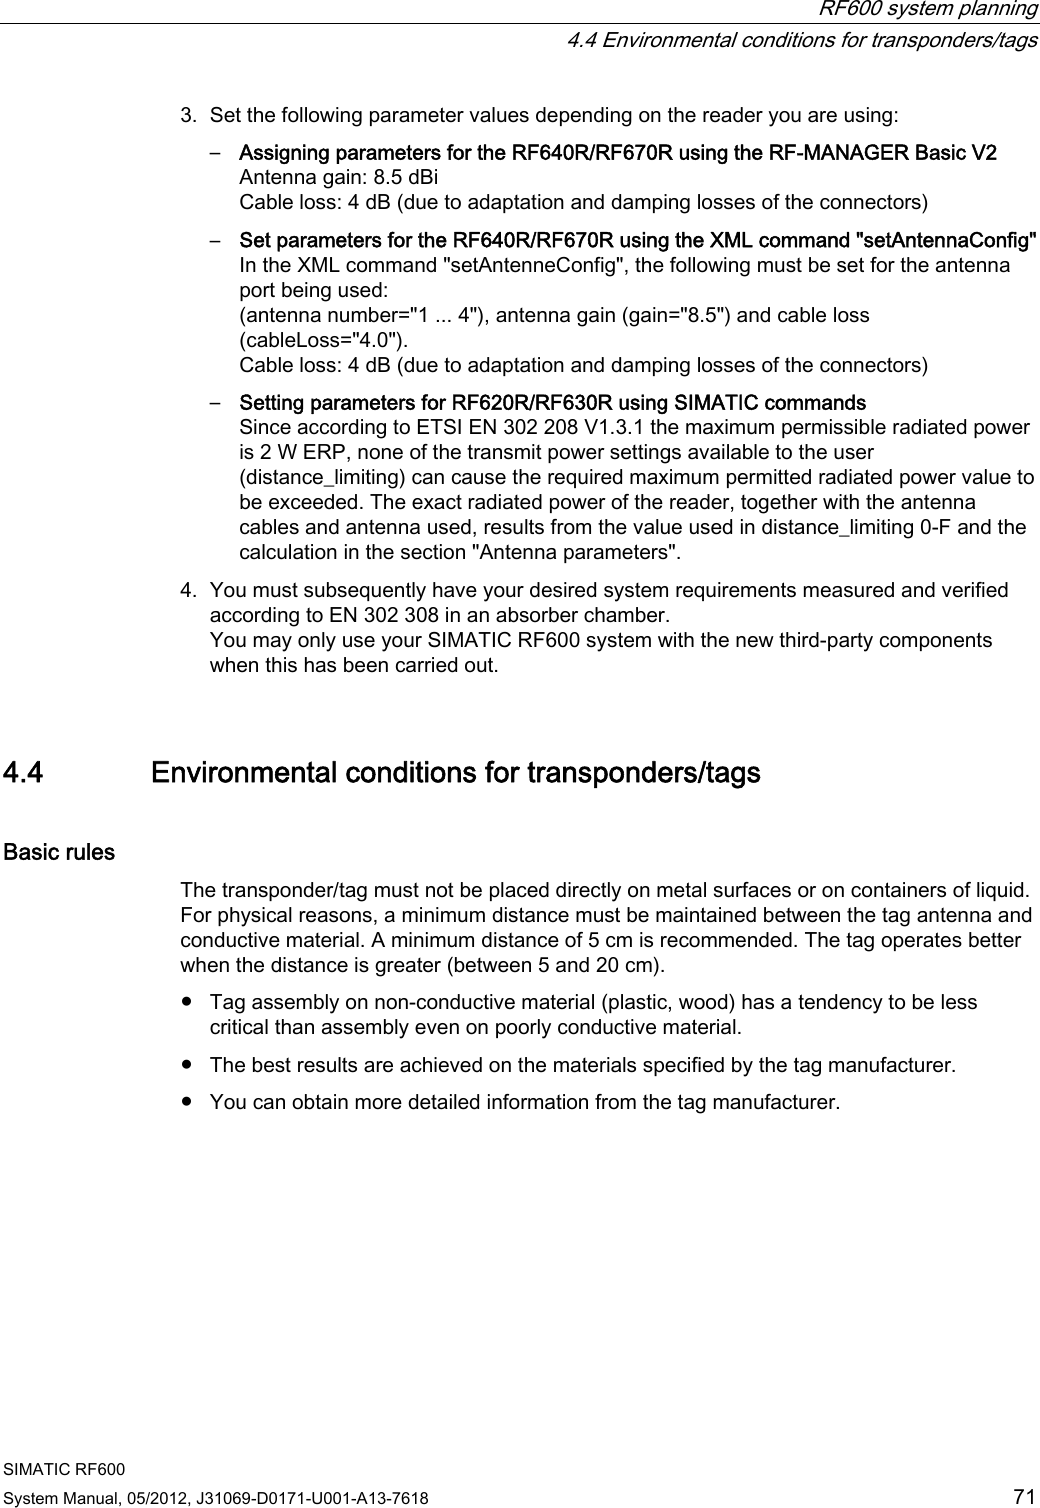  RF600 system planning   4.4 Environmental conditions for transponders/tags SIMATIC RF600 System Manual, 05/2012, J31069-D0171-U001-A13-7618  71 3. Set the following parameter values depending on the reader you are using: –  Assigning parameters for the RF640R/RF670R using the RF-MANAGER Basic V2 Antenna gain: 8.5 dBi Cable loss: 4 dB (due to adaptation and damping losses of the connectors) –  Set parameters for the RF640R/RF670R using the XML command &quot;setAntennaConfig&quot; In the XML command &quot;setAntenneConfig&quot;, the following must be set for the antenna port being used:  (antenna number=&quot;1 ... 4&quot;), antenna gain (gain=&quot;8.5&quot;) and cable loss (cableLoss=&quot;4.0&quot;). Cable loss: 4 dB (due to adaptation and damping losses of the connectors) –  Setting parameters for RF620R/RF630R using SIMATIC commands Since according to ETSI EN 302 208 V1.3.1 the maximum permissible radiated power is 2 W ERP, none of the transmit power settings available to the user (distance_limiting) can cause the required maximum permitted radiated power value to be exceeded. The exact radiated power of the reader, together with the antenna cables and antenna used, results from the value used in distance_limiting 0-F and the calculation in the section &quot;Antenna parameters&quot;. 4. You must subsequently have your desired system requirements measured and verified according to EN 302 308 in an absorber chamber. You may only use your SIMATIC RF600 system with the new third-party components when this has been carried out. 4.4 Environmental conditions for transponders/tags Basic rules The transponder/tag must not be placed directly on metal surfaces or on containers of liquid. For physical reasons, a minimum distance must be maintained between the tag antenna and conductive material. A minimum distance of 5 cm is recommended. The tag operates better when the distance is greater (between 5 and 20 cm). ●  Tag assembly on non-conductive material (plastic, wood) has a tendency to be less critical than assembly even on poorly conductive material. ●  The best results are achieved on the materials specified by the tag manufacturer. ●  You can obtain more detailed information from the tag manufacturer. 